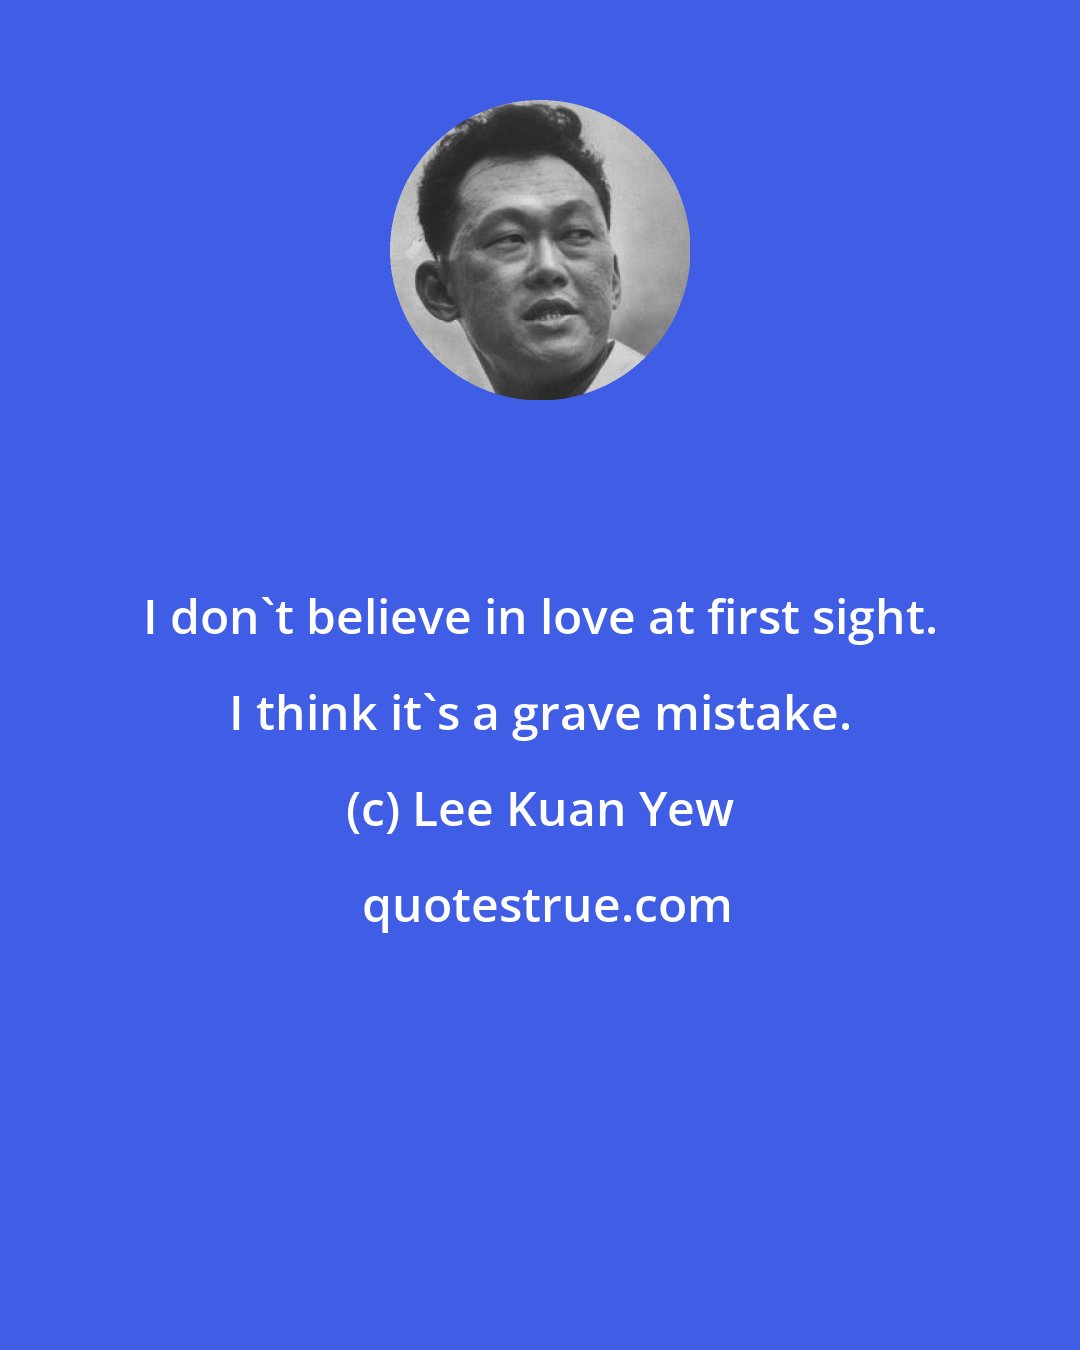 Lee Kuan Yew: I don't believe in love at first sight. I think it's a grave mistake.